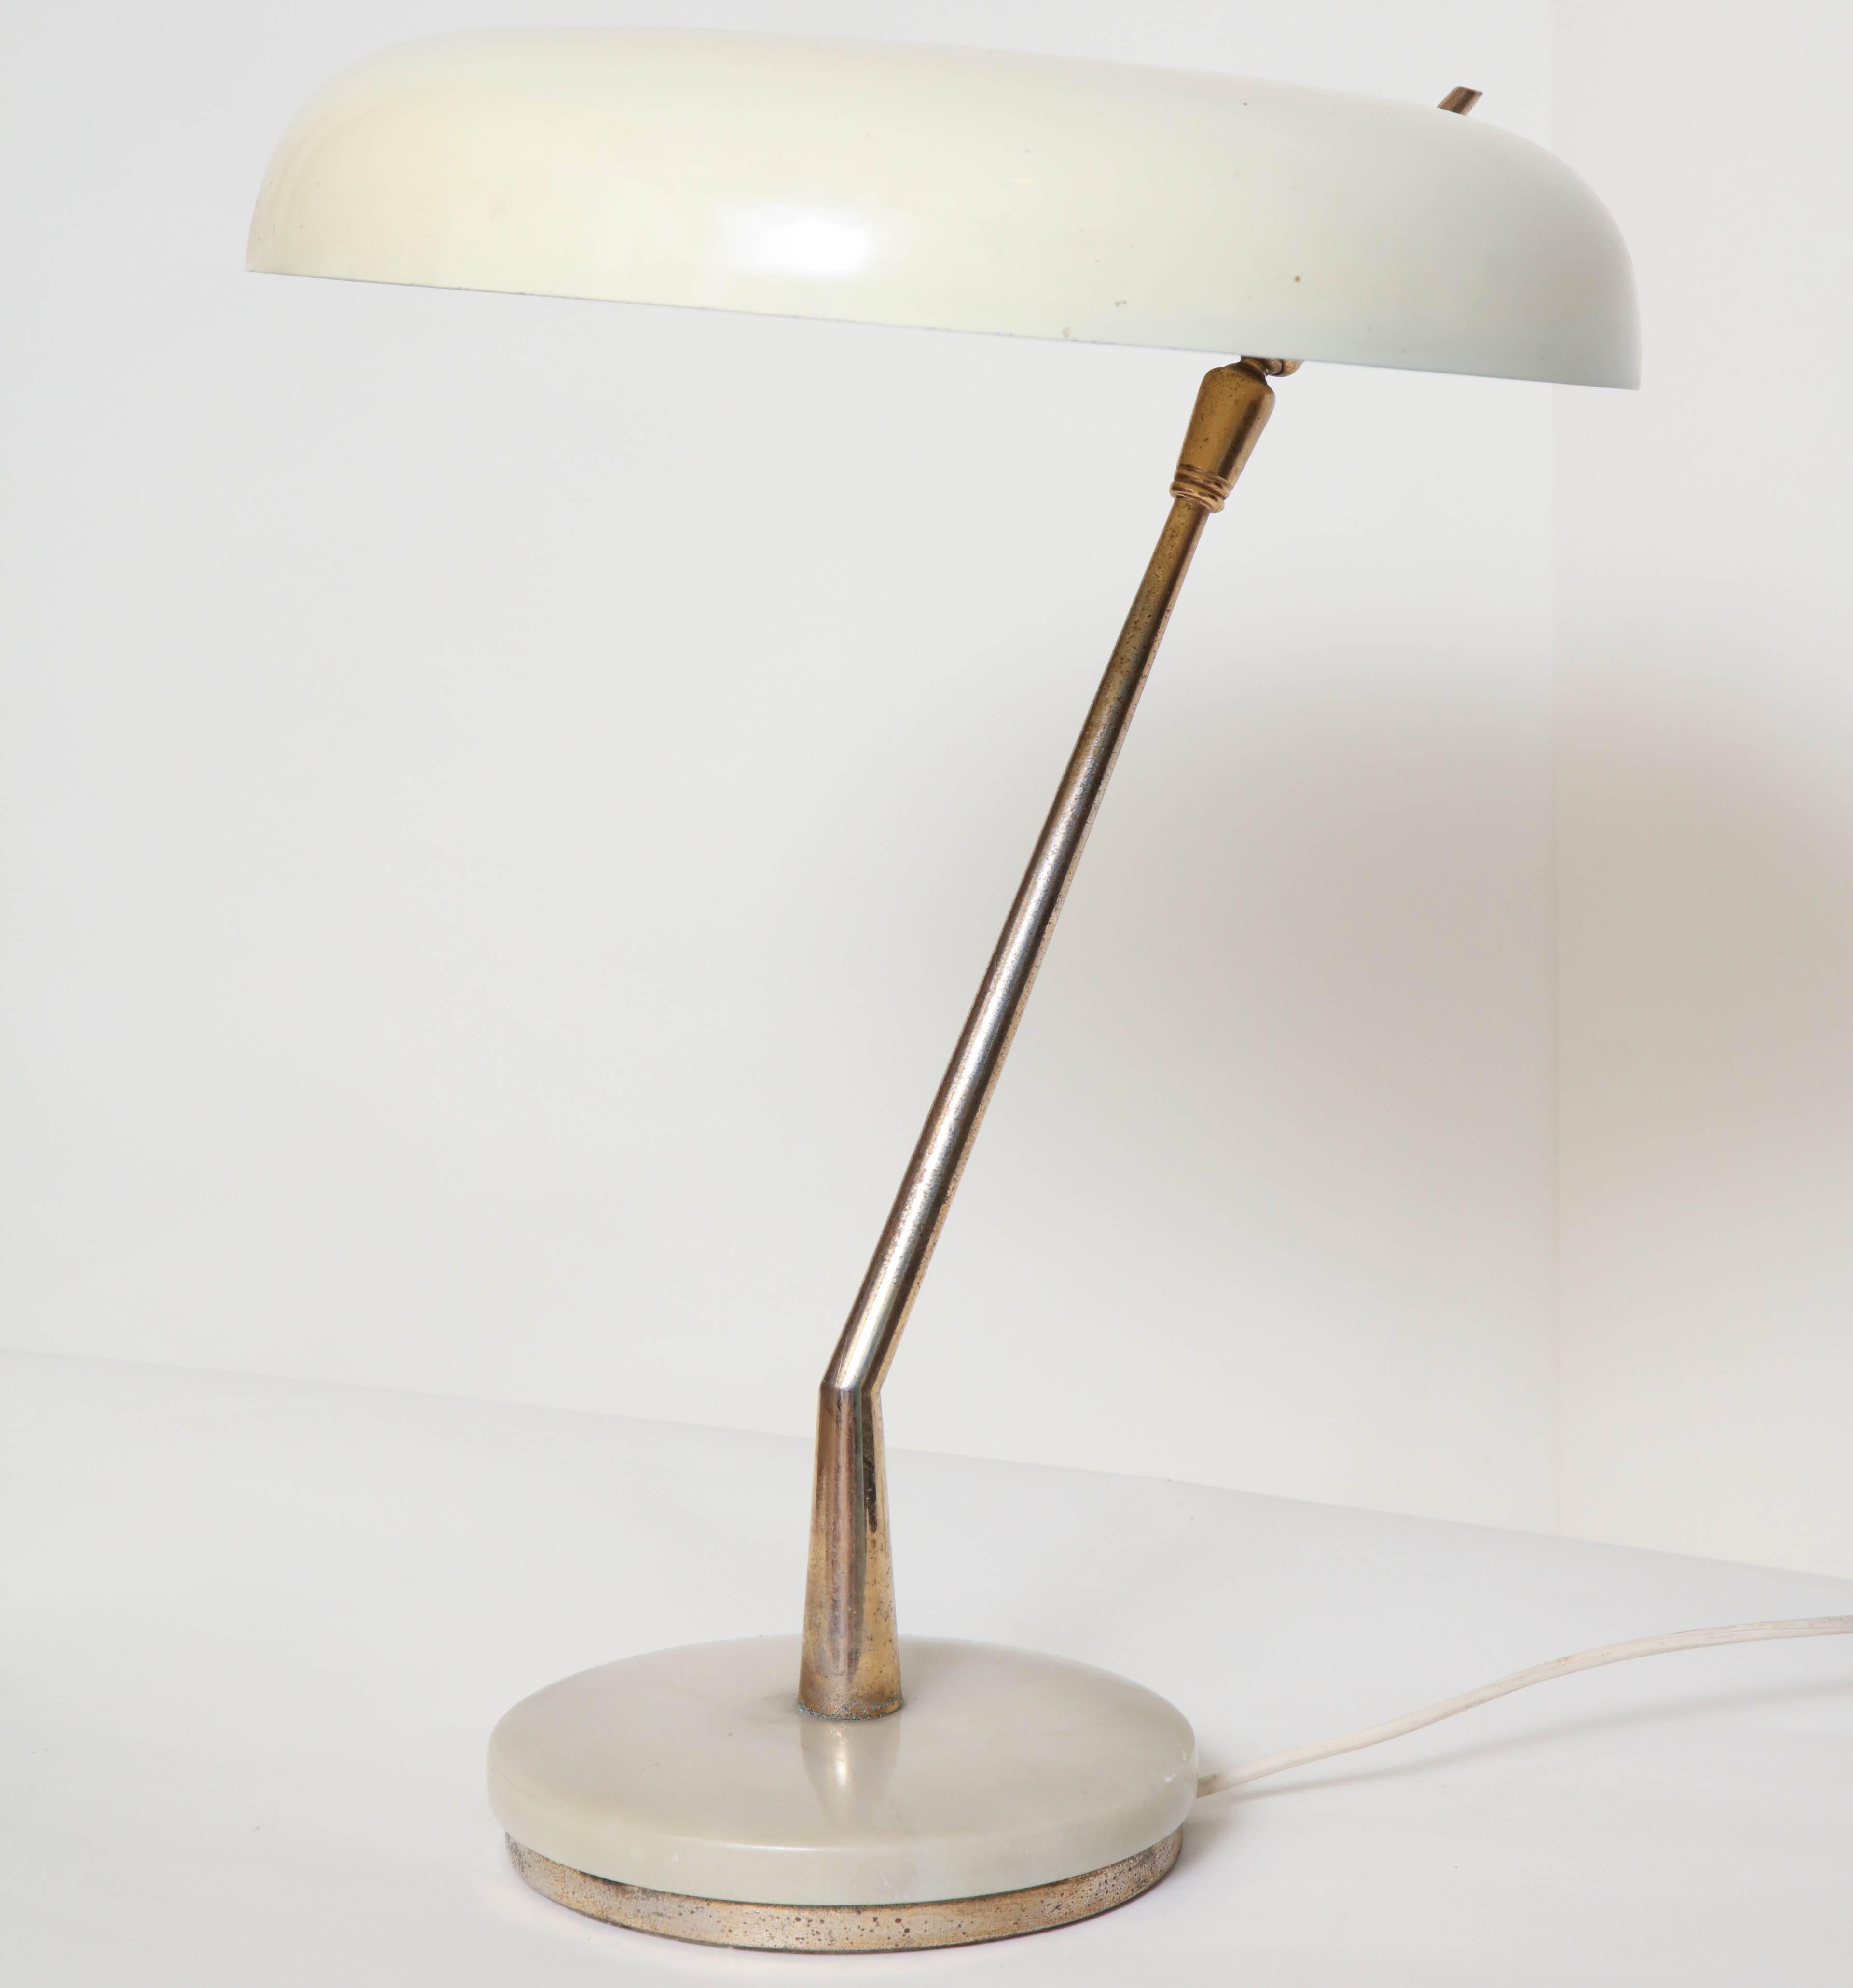 Articulated Table Lamp Attributed to Arredoluce Italian Mid-Century Modern, 1950 3